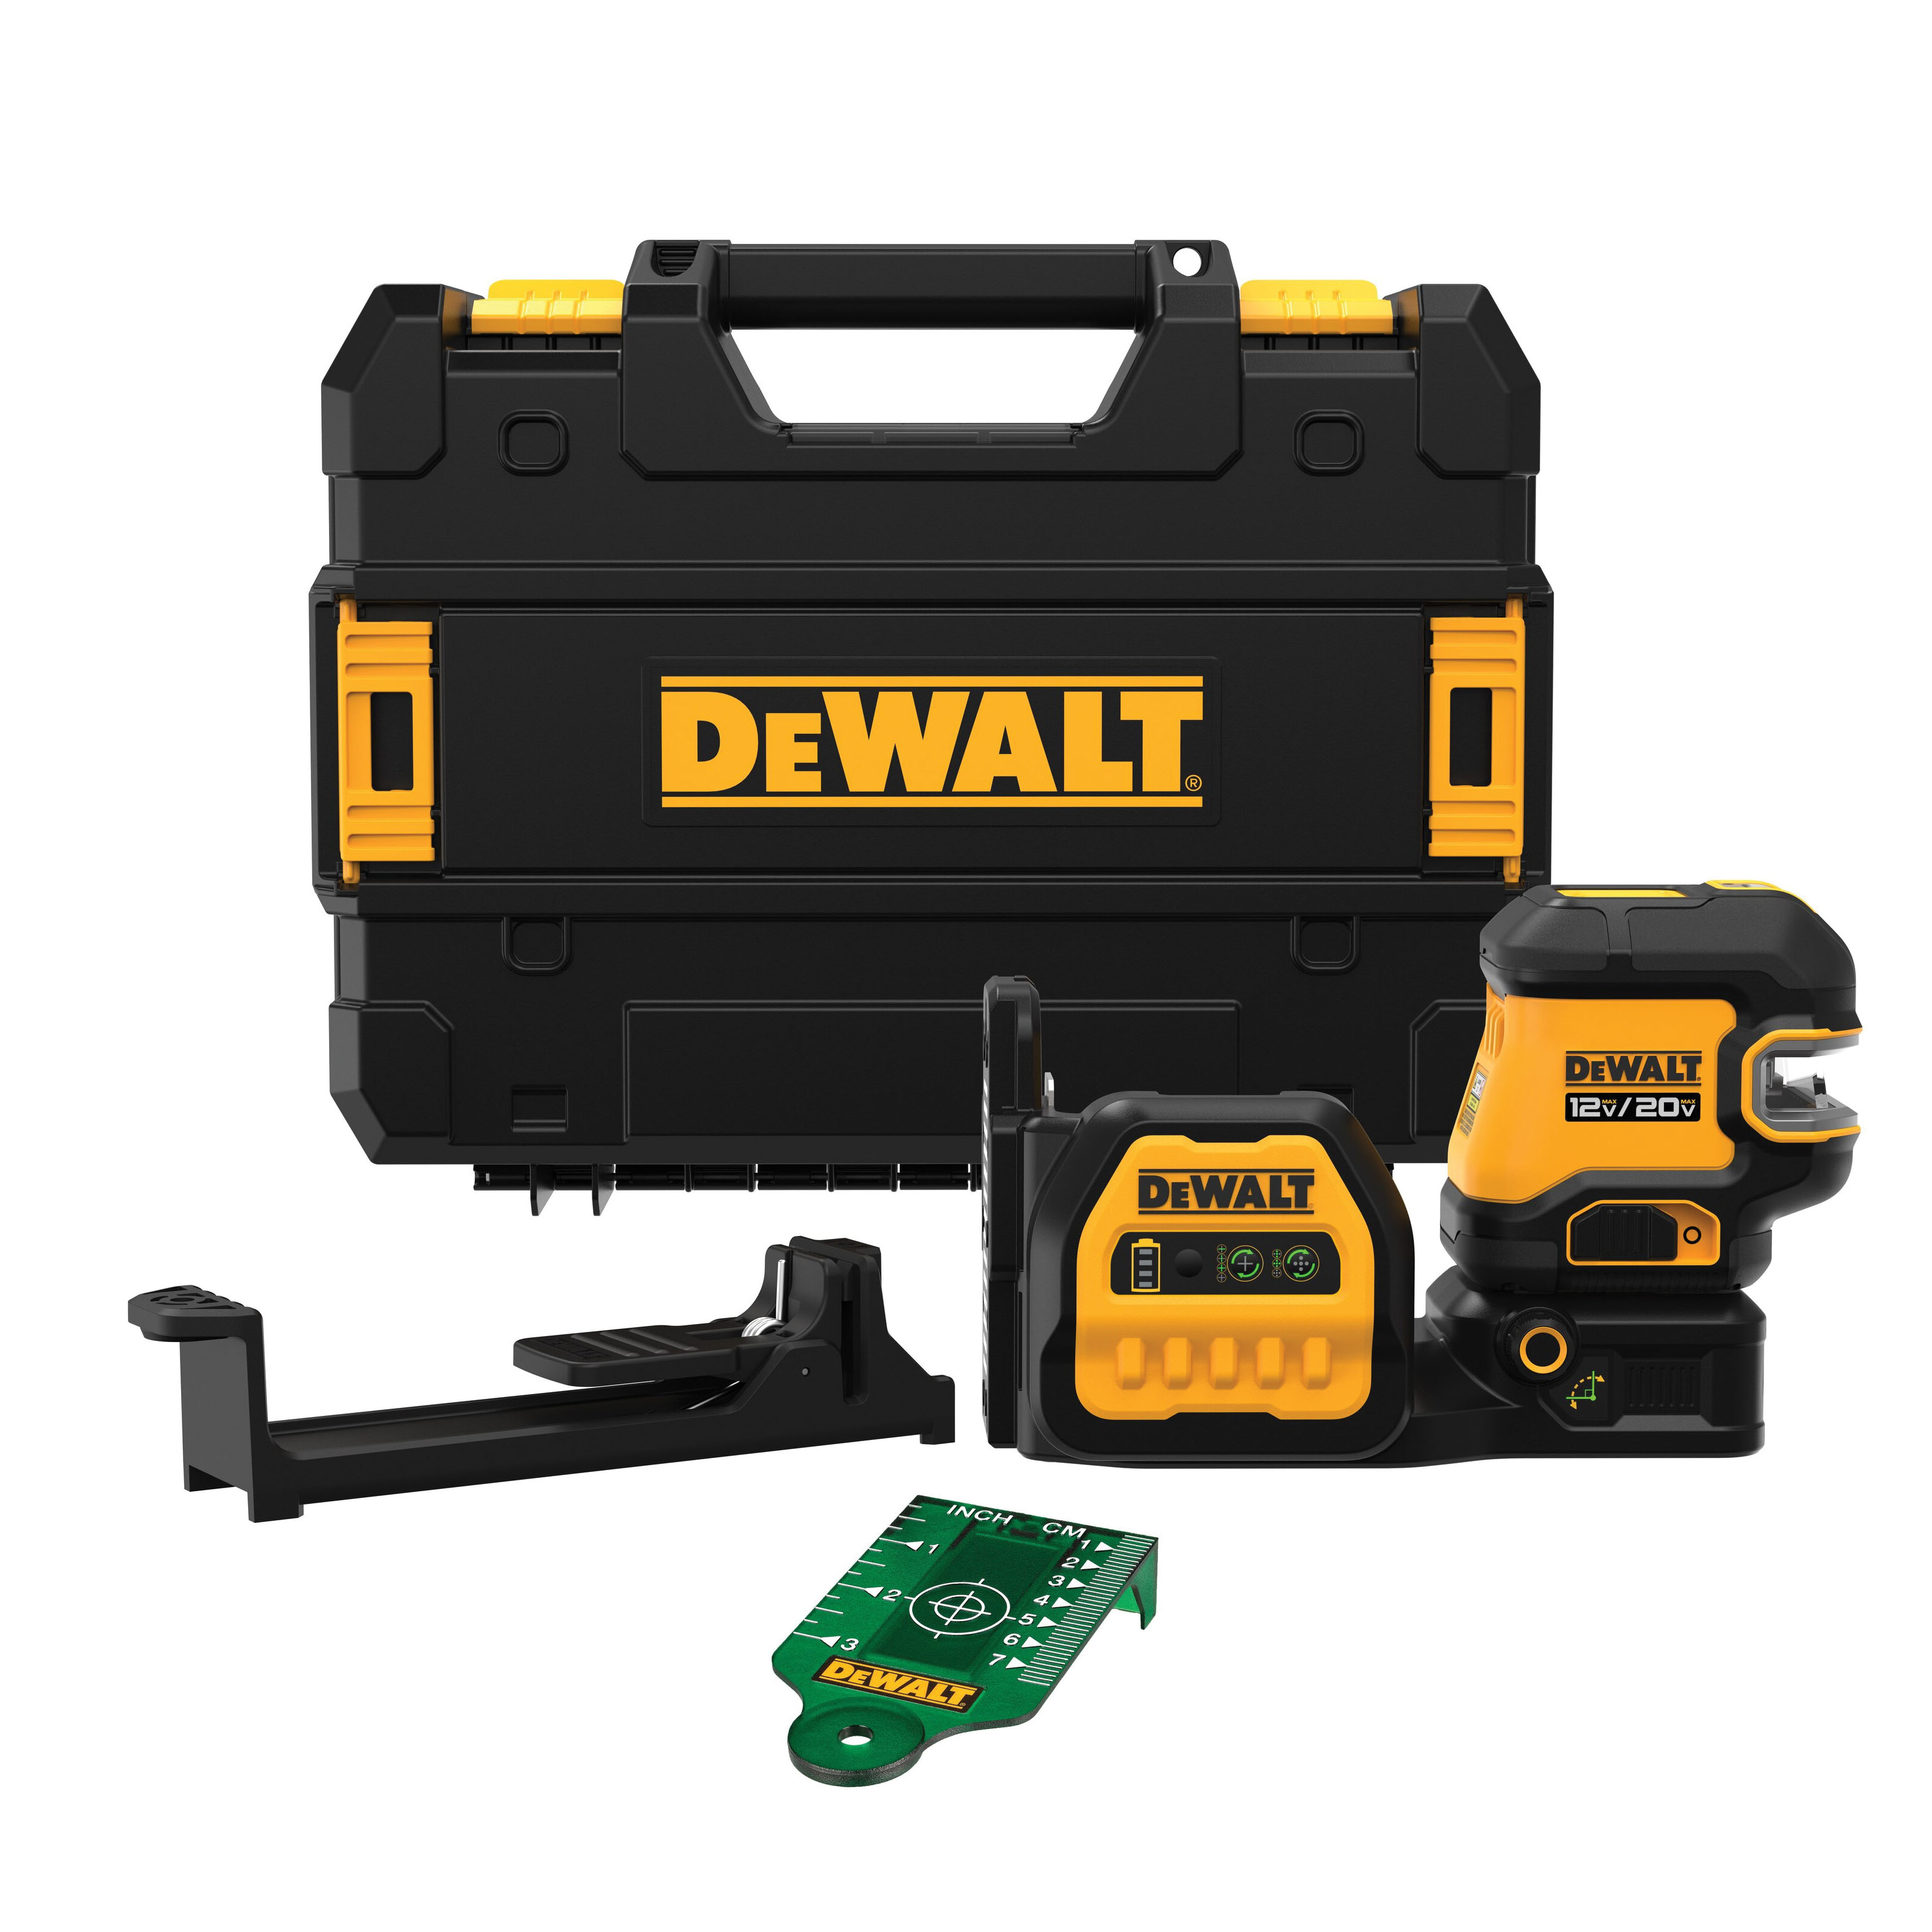 DeWALT DCLE34520GB Cross Line Laser Level, 165 ft, 1/8 in at 30 ft Accuracy, 2-Beam, Green Laser